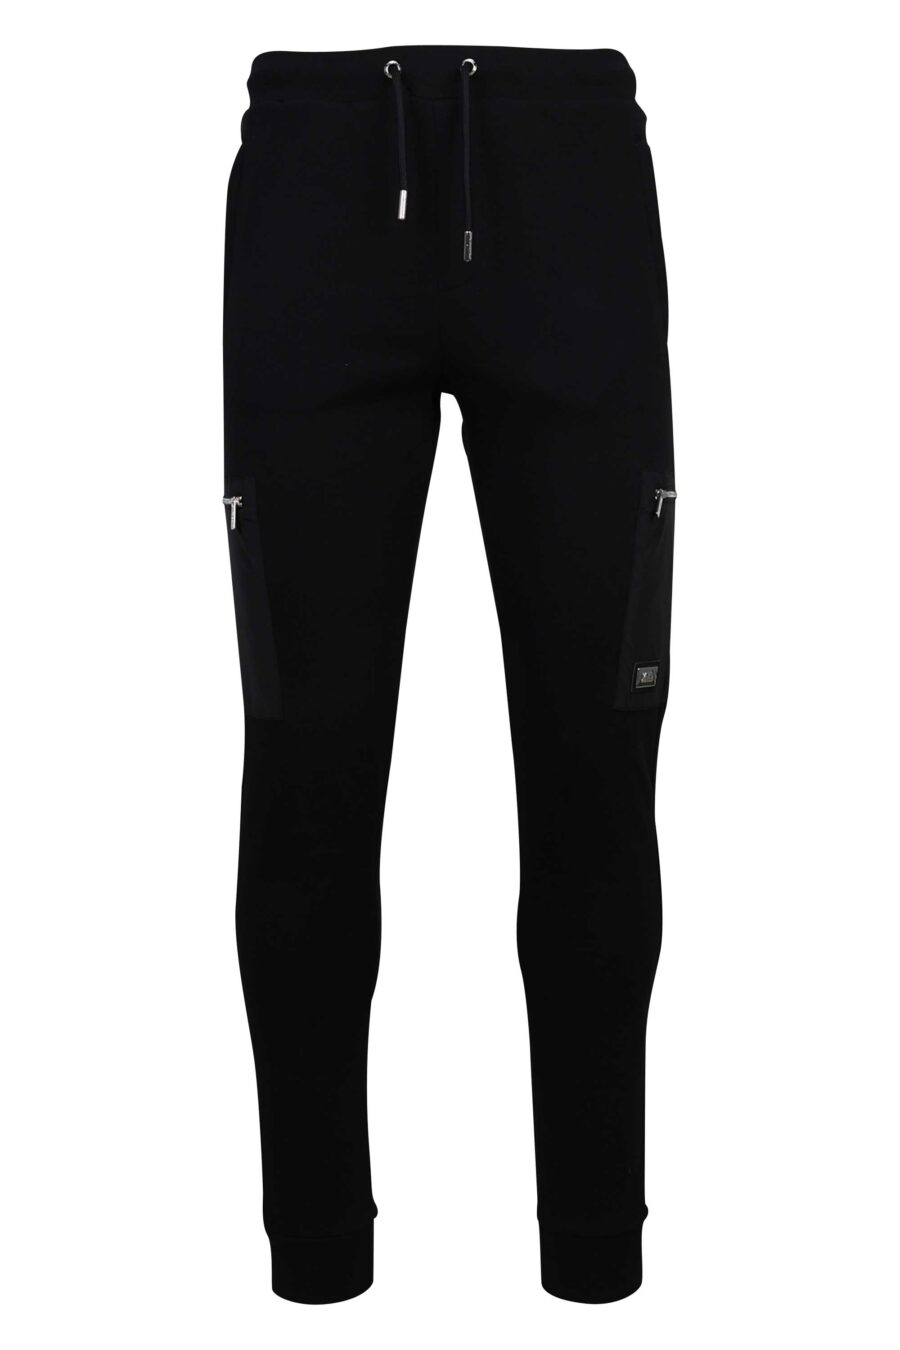 Karl Lagerfeld - Black tracksuit bottoms with zipped side pockets - BLS  Fashion